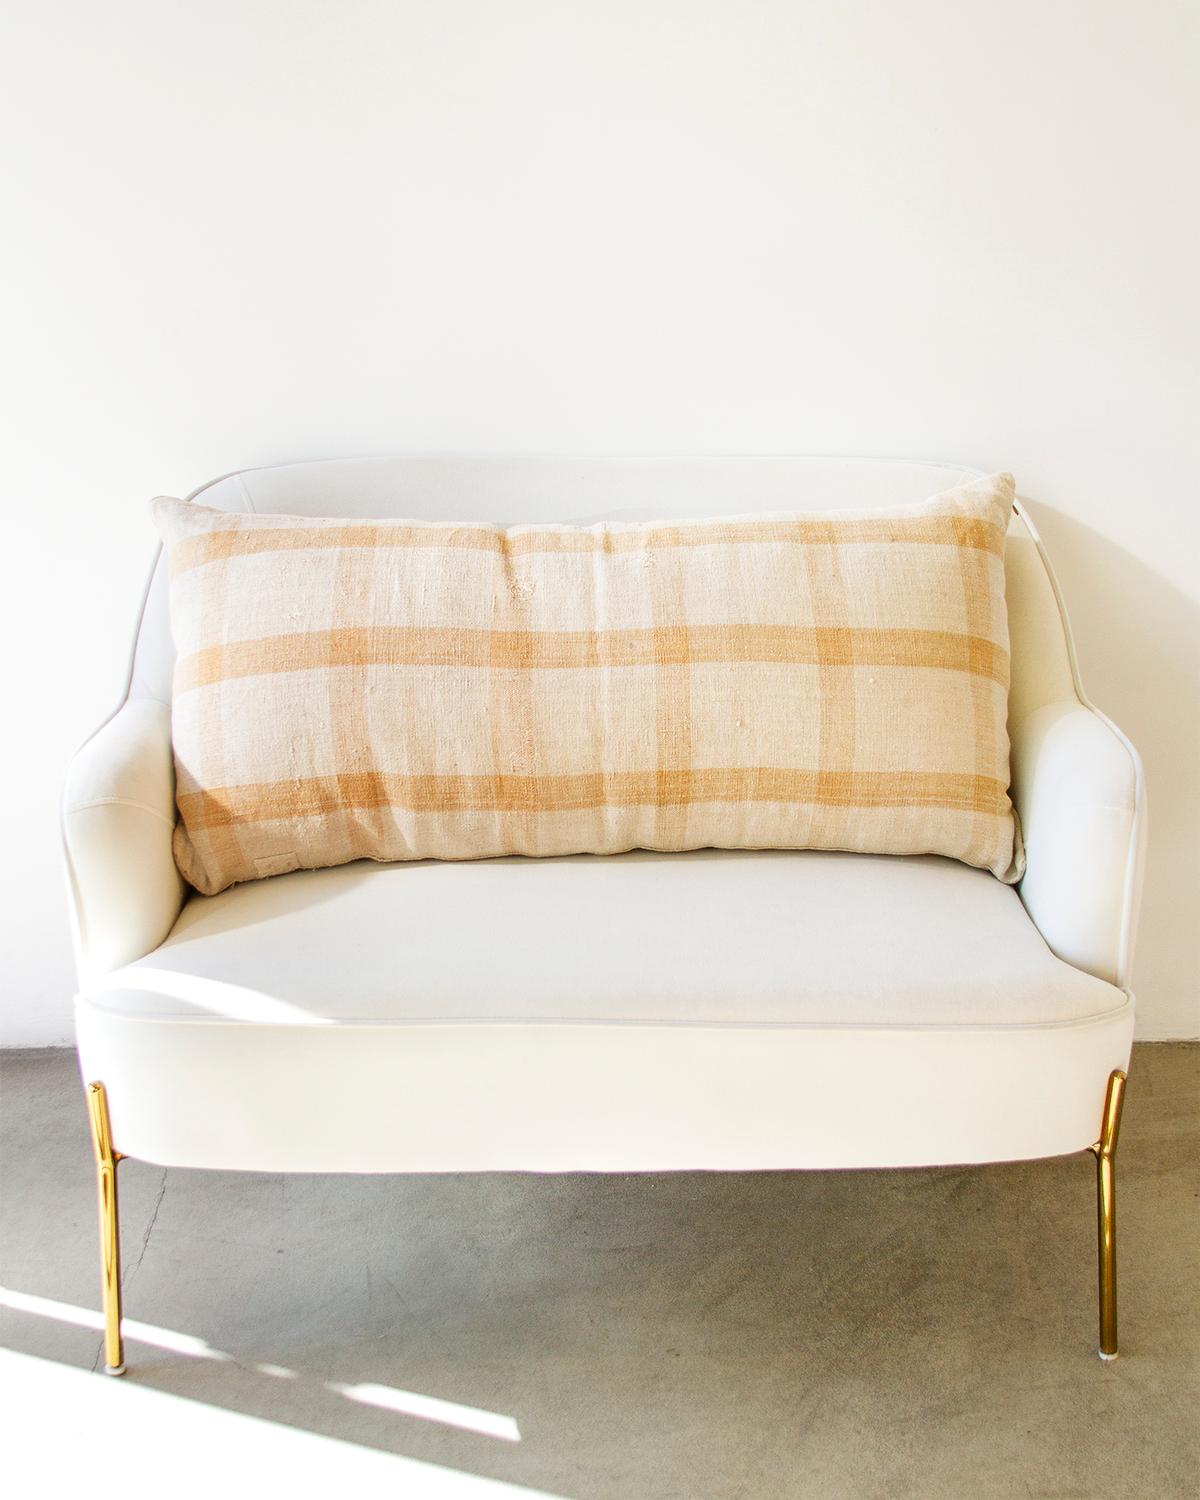 One of a kind vintage linen throw pillows to beautify your home. A hundred years ago these fabrics used to be cereal sacks in Northern Portugal. Now they get rediscovered and transformed into a rare collectible. This cosmopolitan Oversized Throw